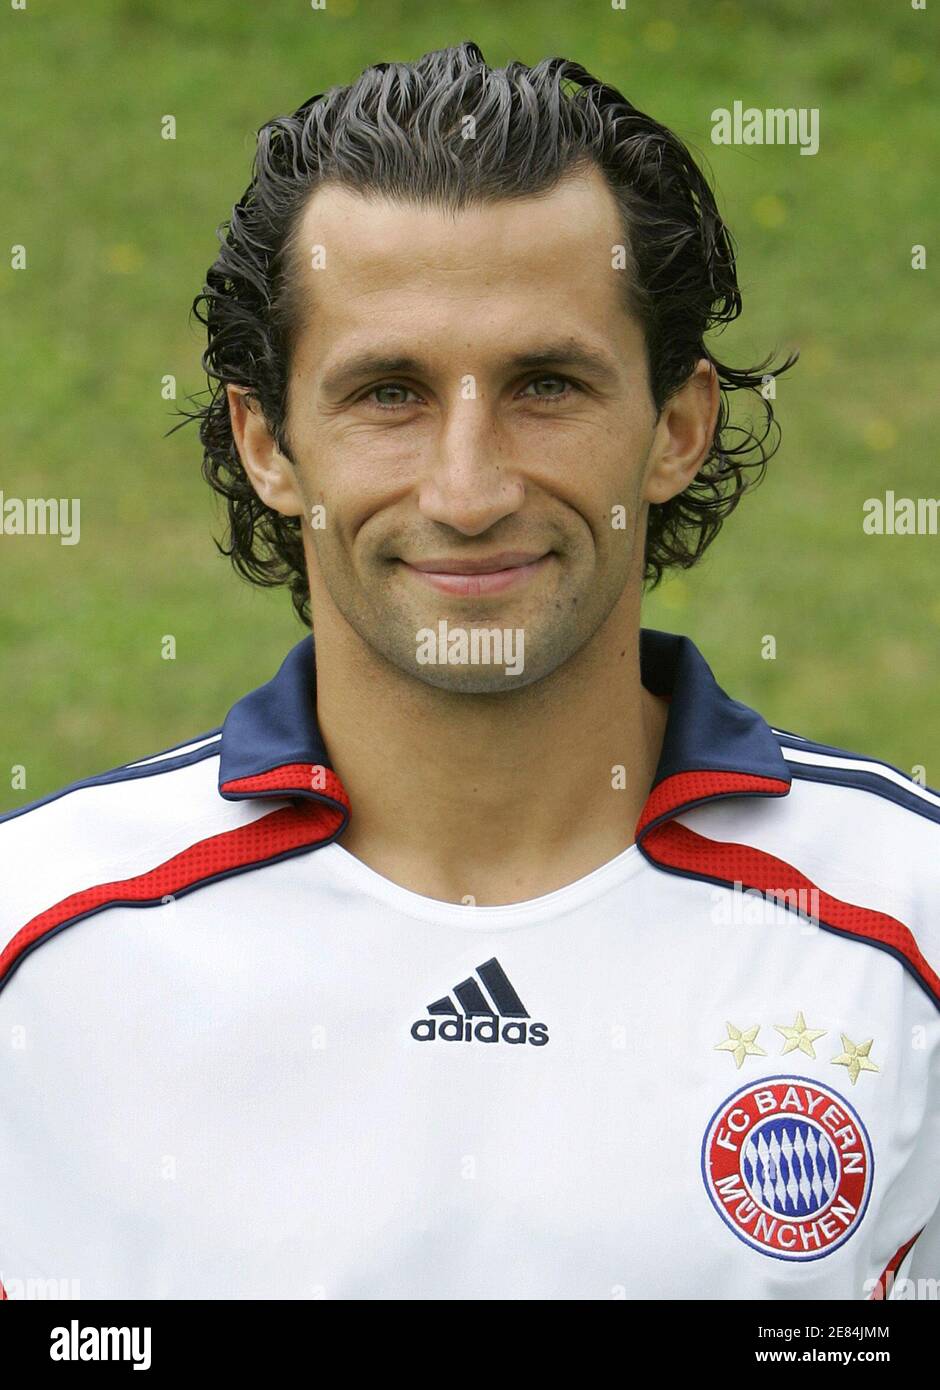 Bayern Munich's midfielder Hasan Salihamidzic from Bosnia is pictured  during a photo call in Munich August 2, 2006. REUTERS/Michaela Rehle  (GERMANY Stock Photo - Alamy